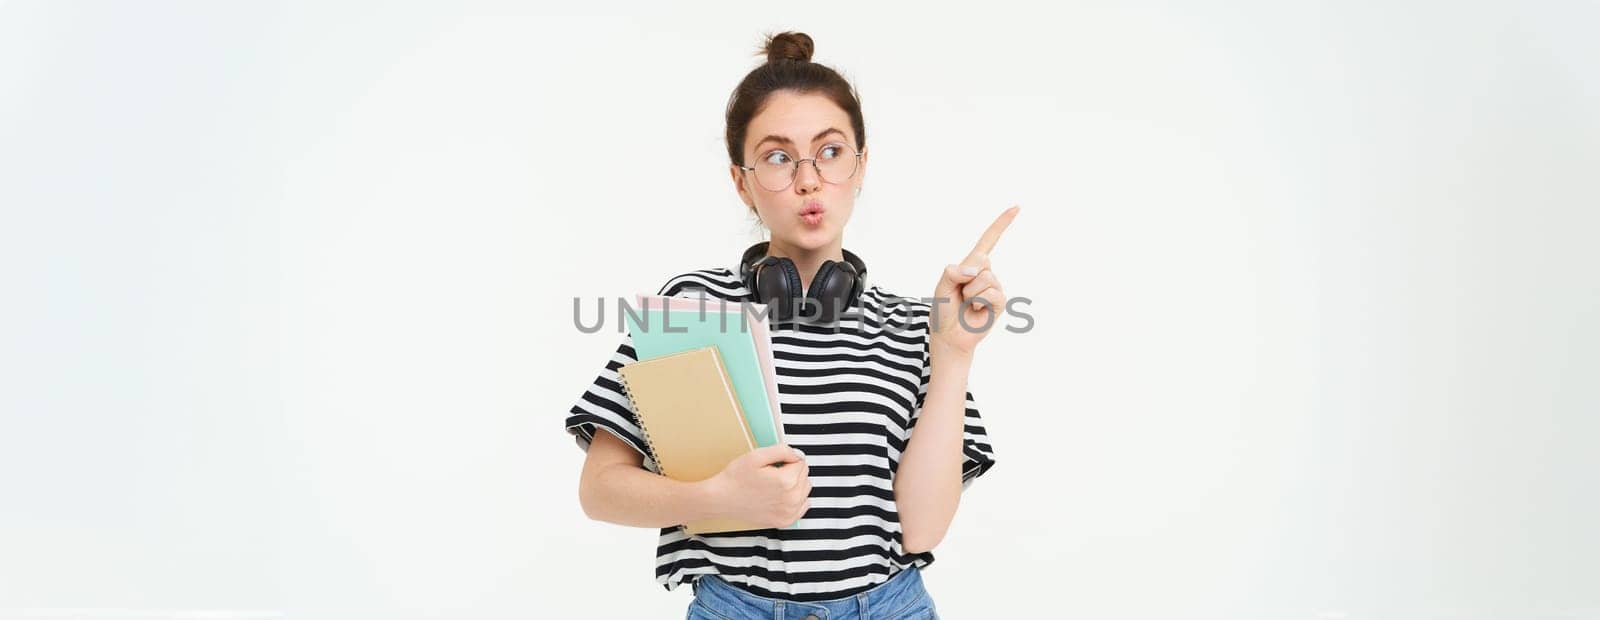 Image of intrigued girl in glasses points and looks left at smth interesting, holds documents, white background.